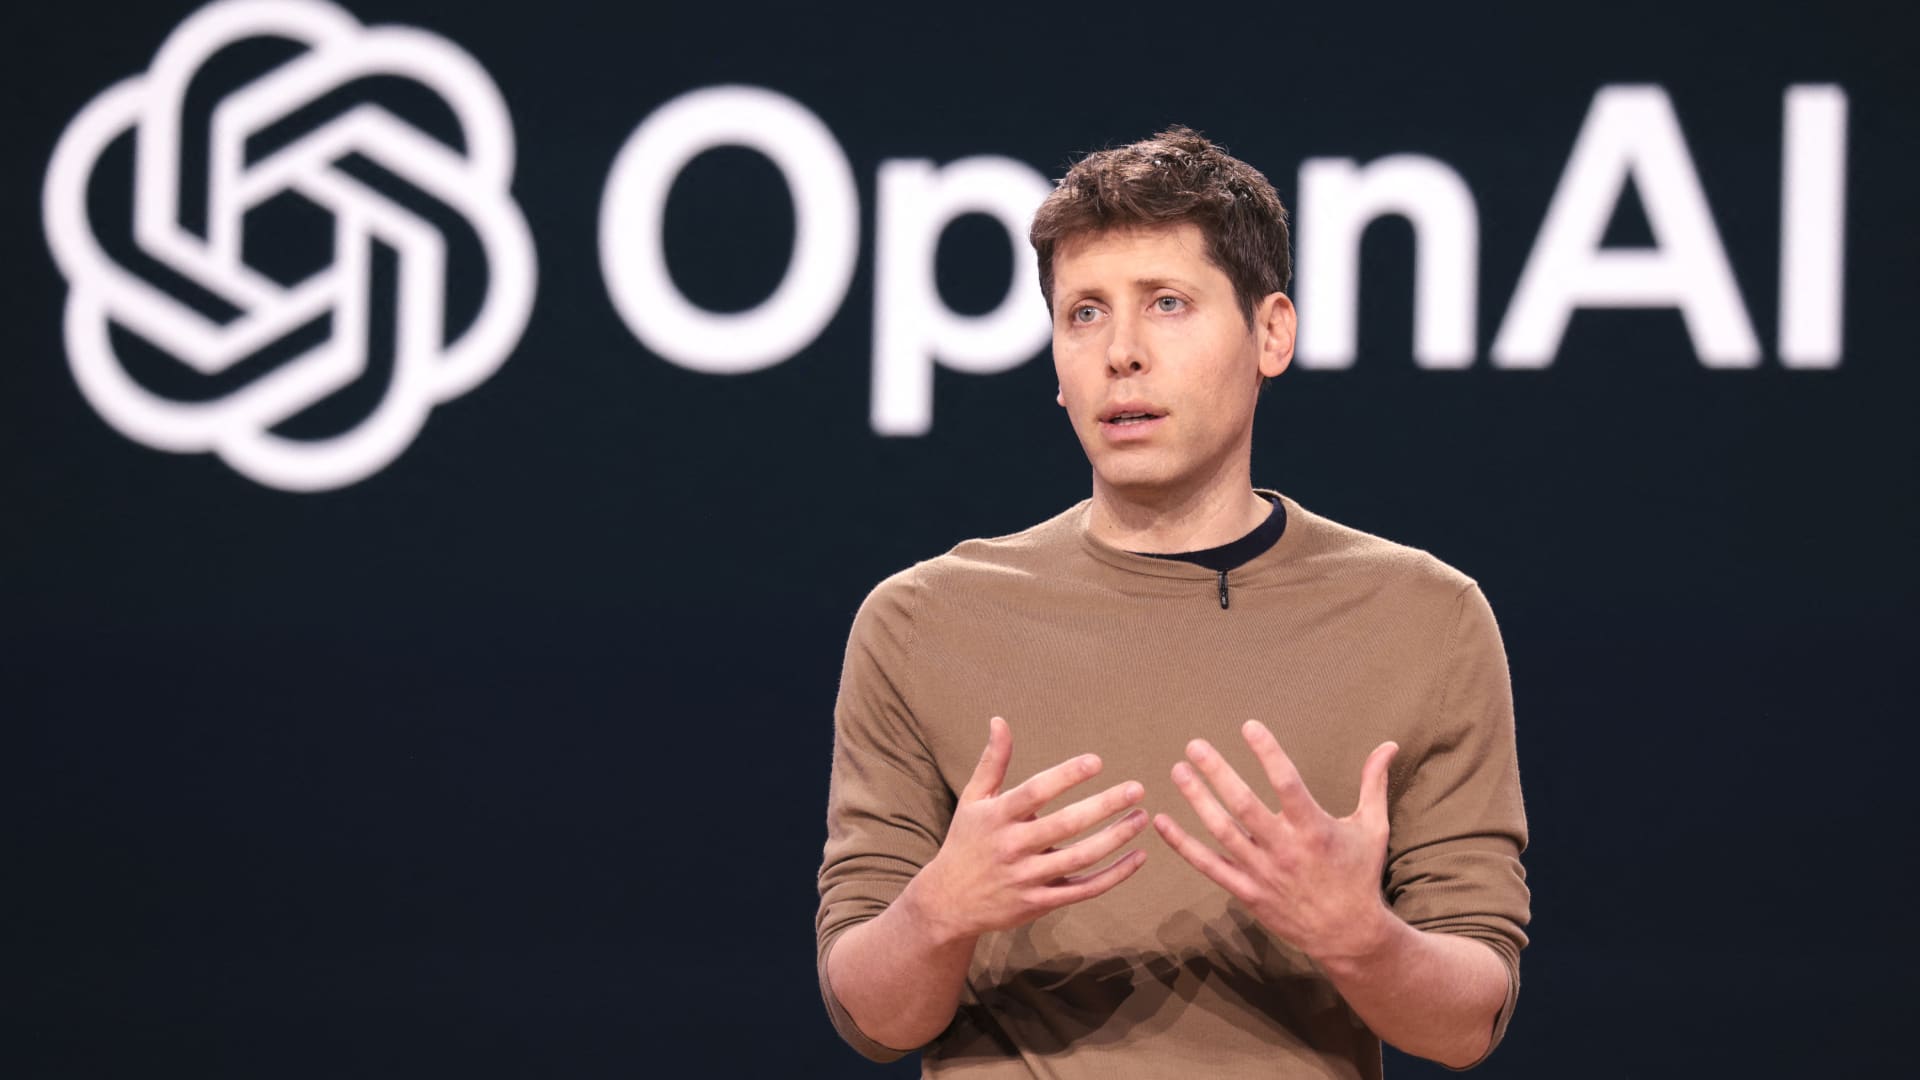 OpenAI open letter warns of AI’s ‘serious risk’ and lack of oversight